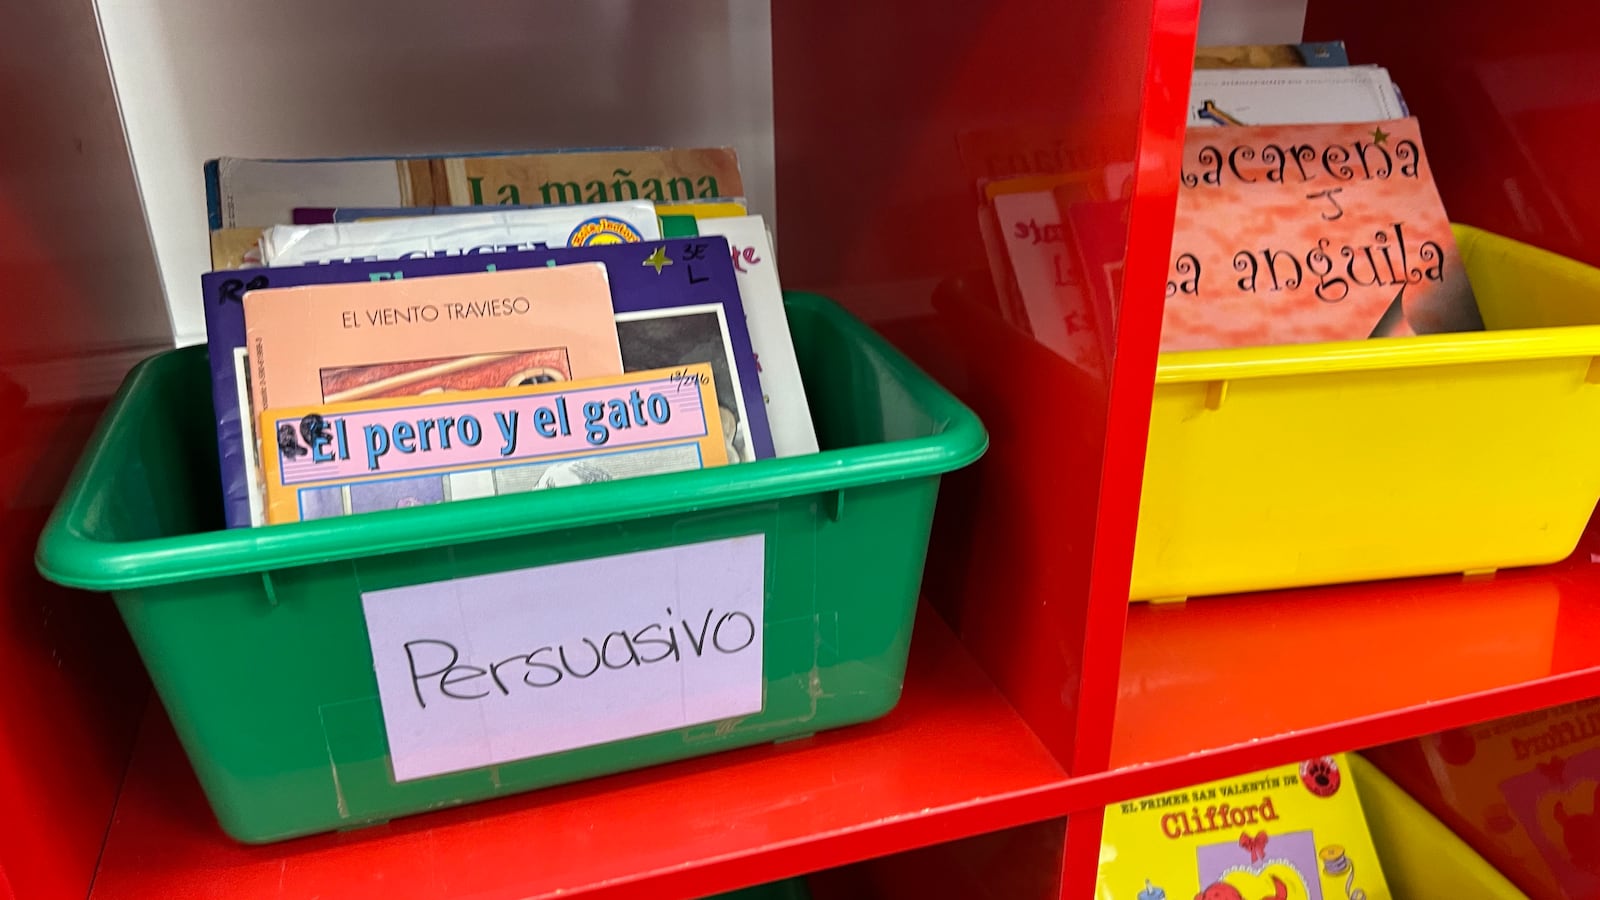 Multicolored bins sit on red shelves in a classroom. They contain Spanish language books.